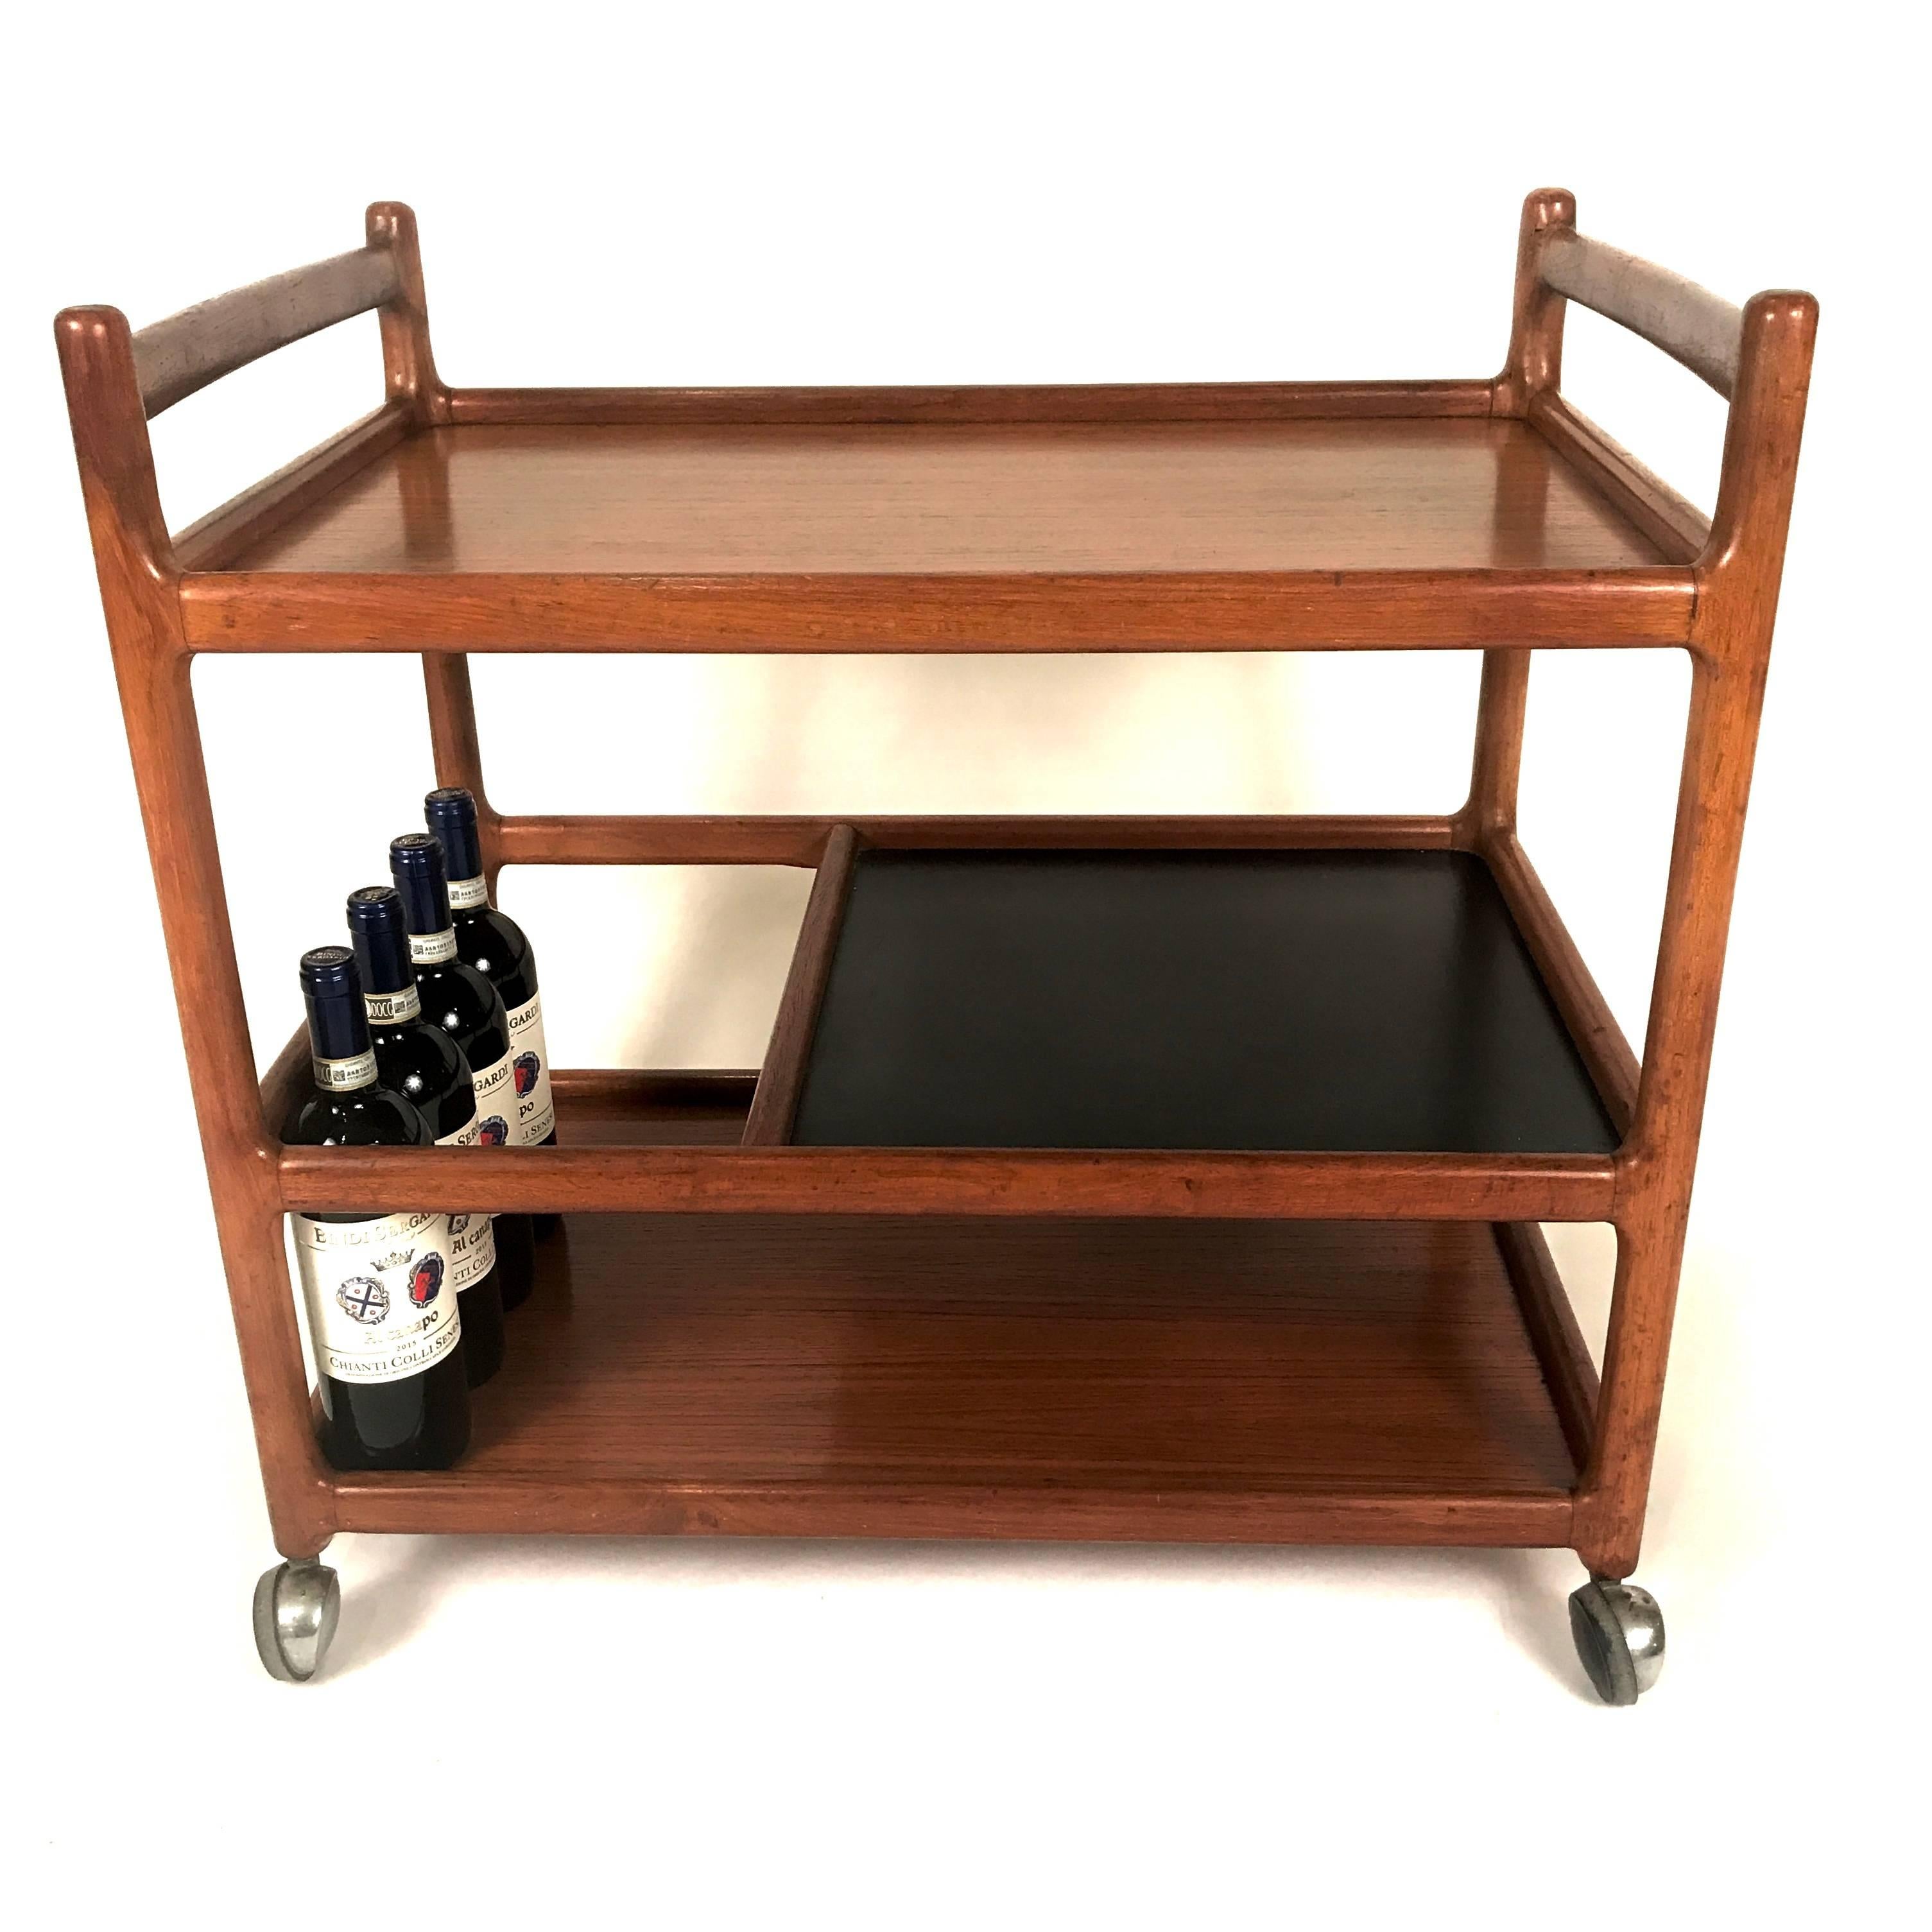 Danish Modern bar cart or trolley by Johannes Andersen for CFC Silkeborg in teak. Space for convenient bottle storage. Smooth rolling metal casters.